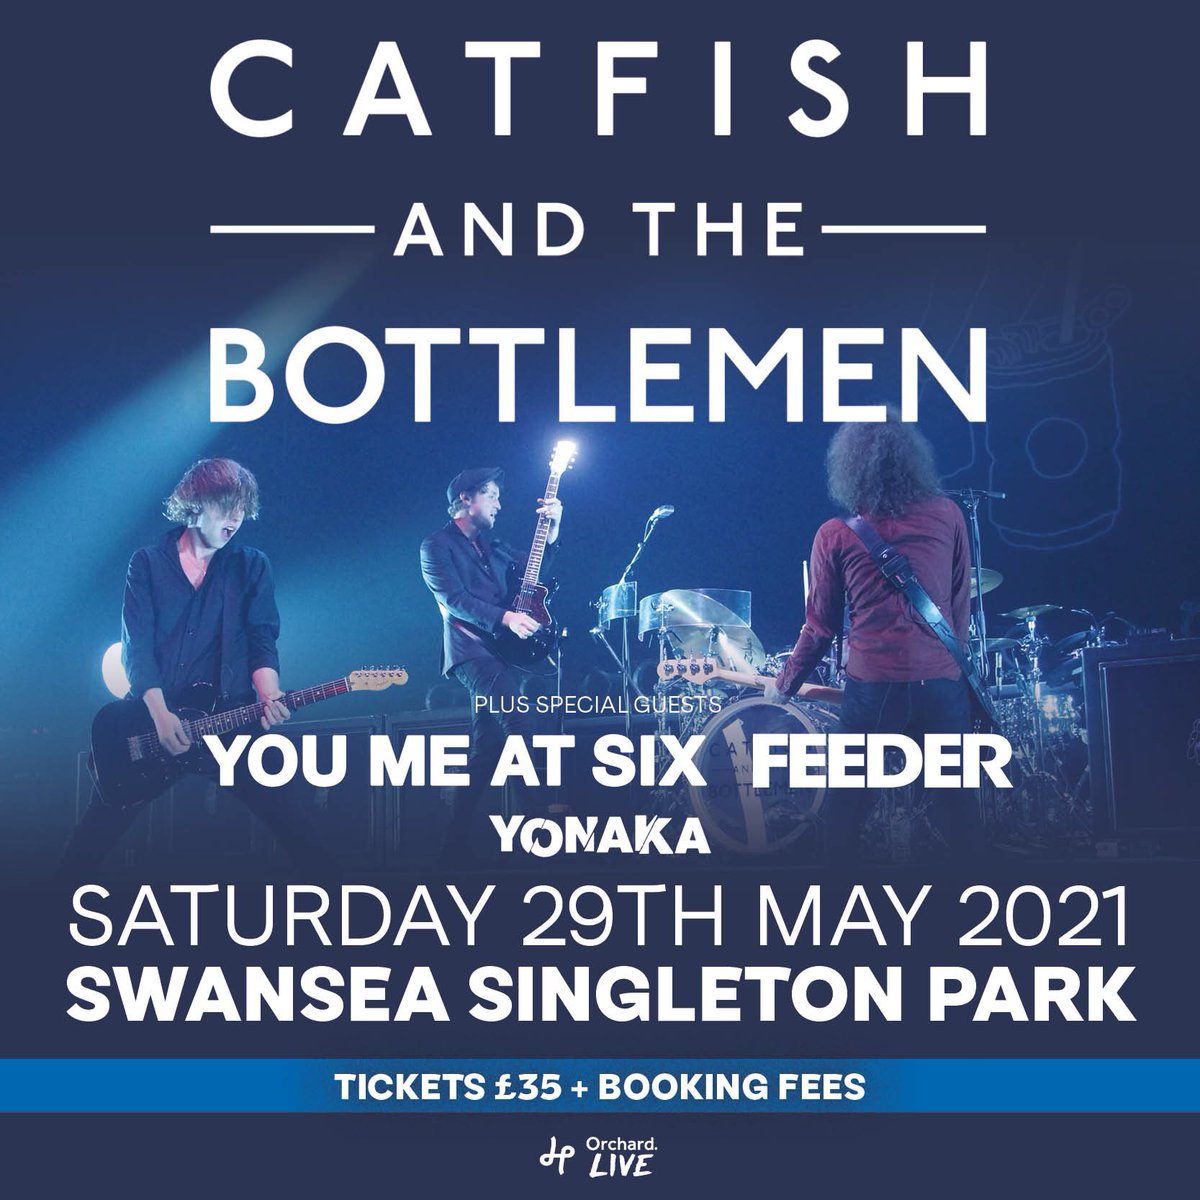 The rescheduled date for Swansea Singleton Park is Saturday 29 May 2021 alttickets.com/catfish-and-th…